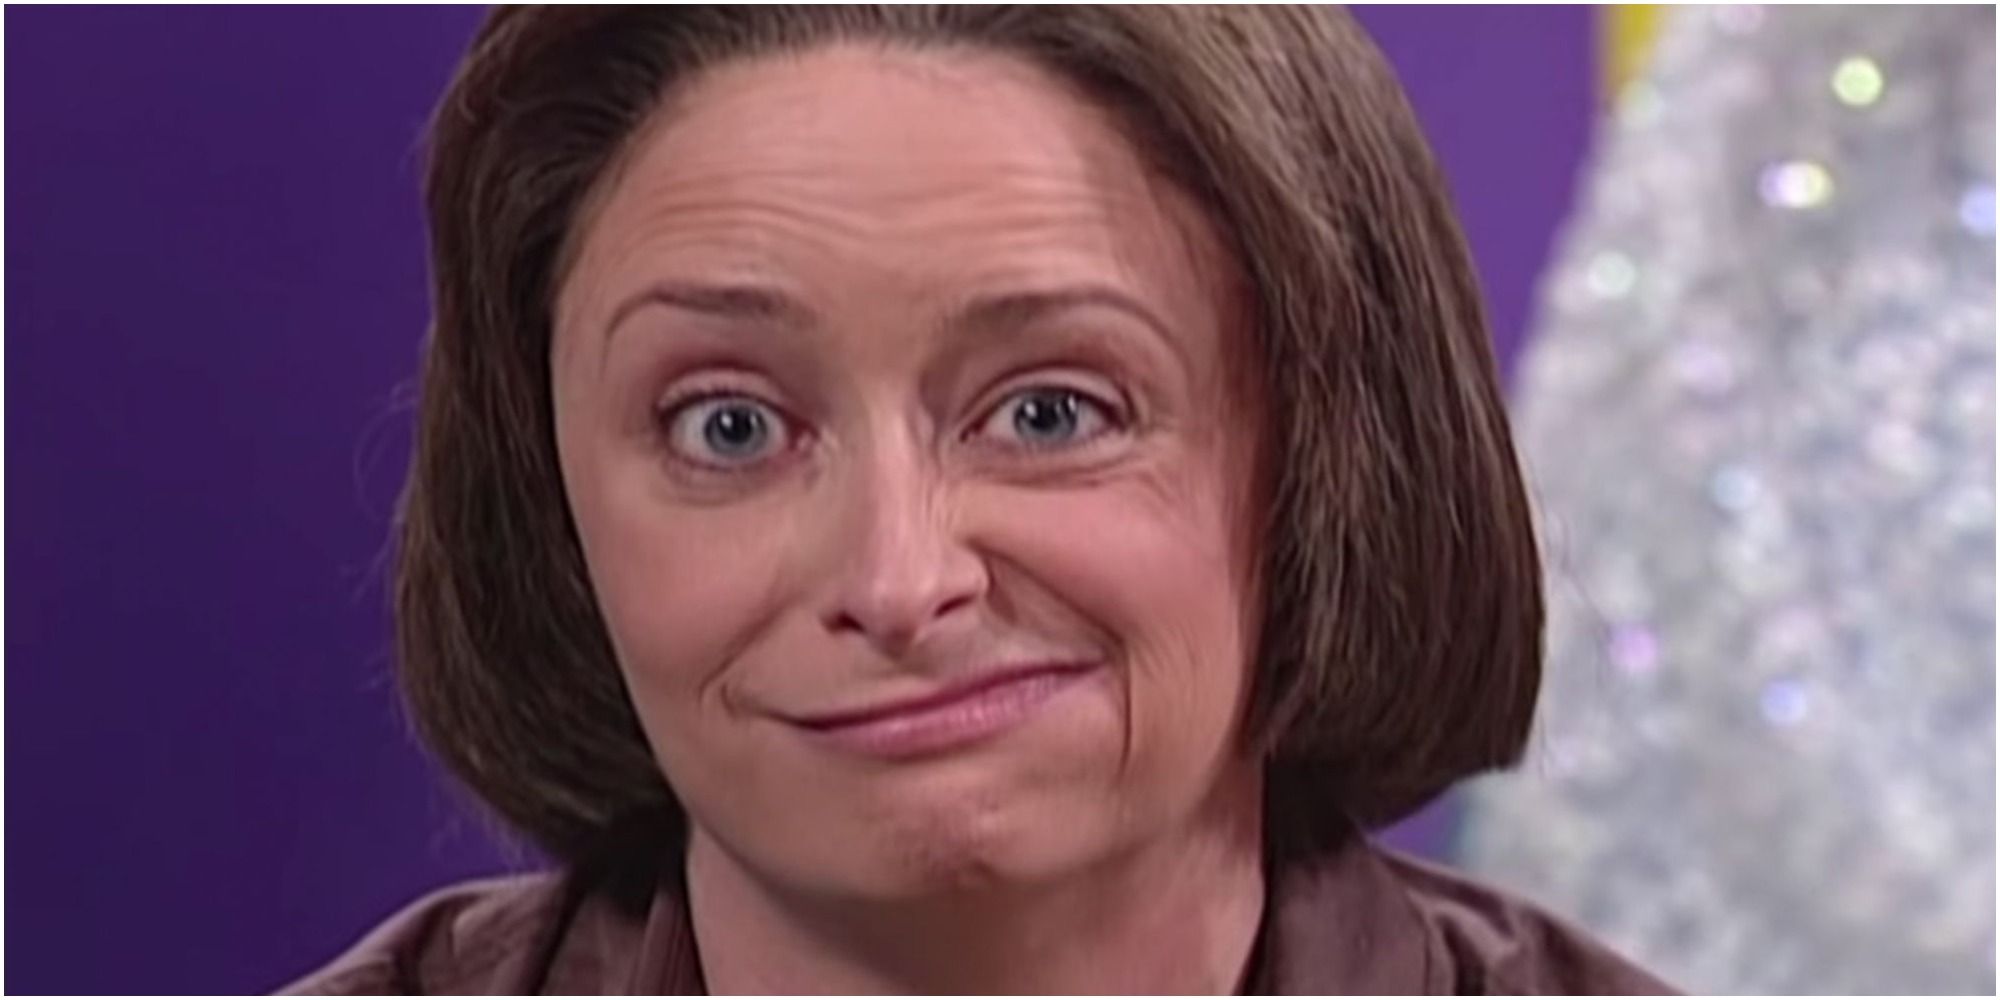 A screenshot of Debbie Downer looking at the camera with a knowing face in Saturday Night Live